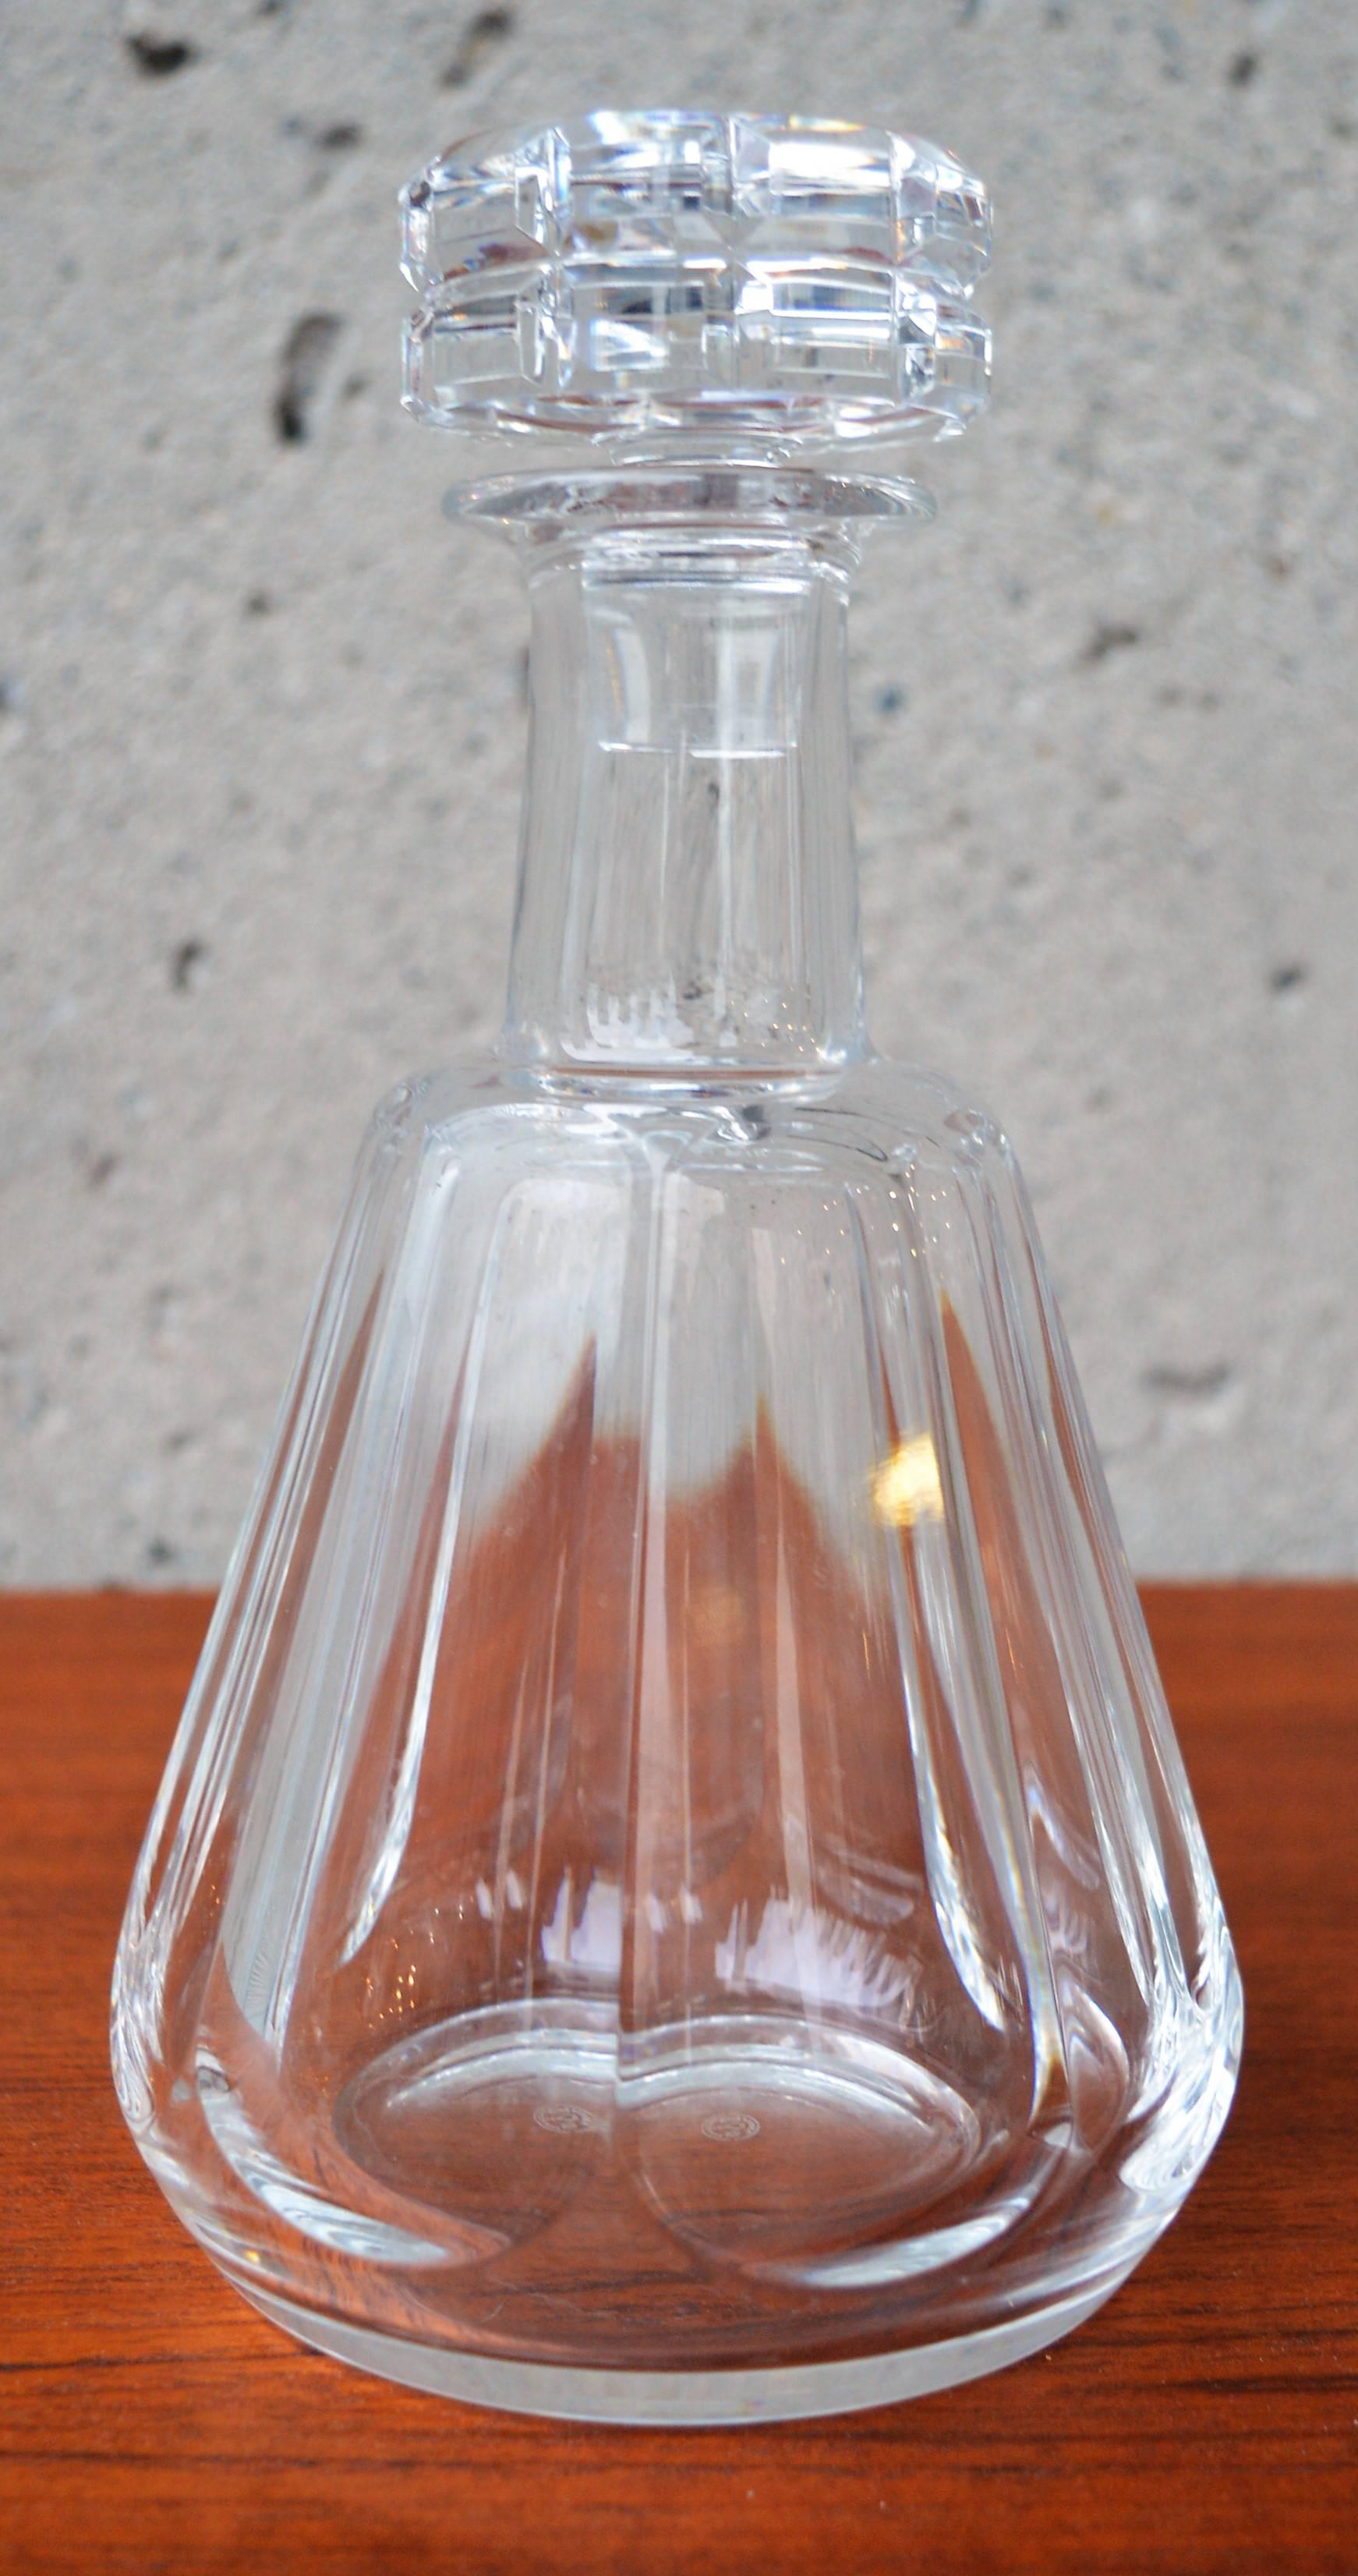 This exquisite French cut crystal decanter is beautifully faceted and in amazing condition, with no chips, breaks or repairs. Makers mark underneath. Small line of calcium on the bottom of the bottle which isn't visible unless turned upside down